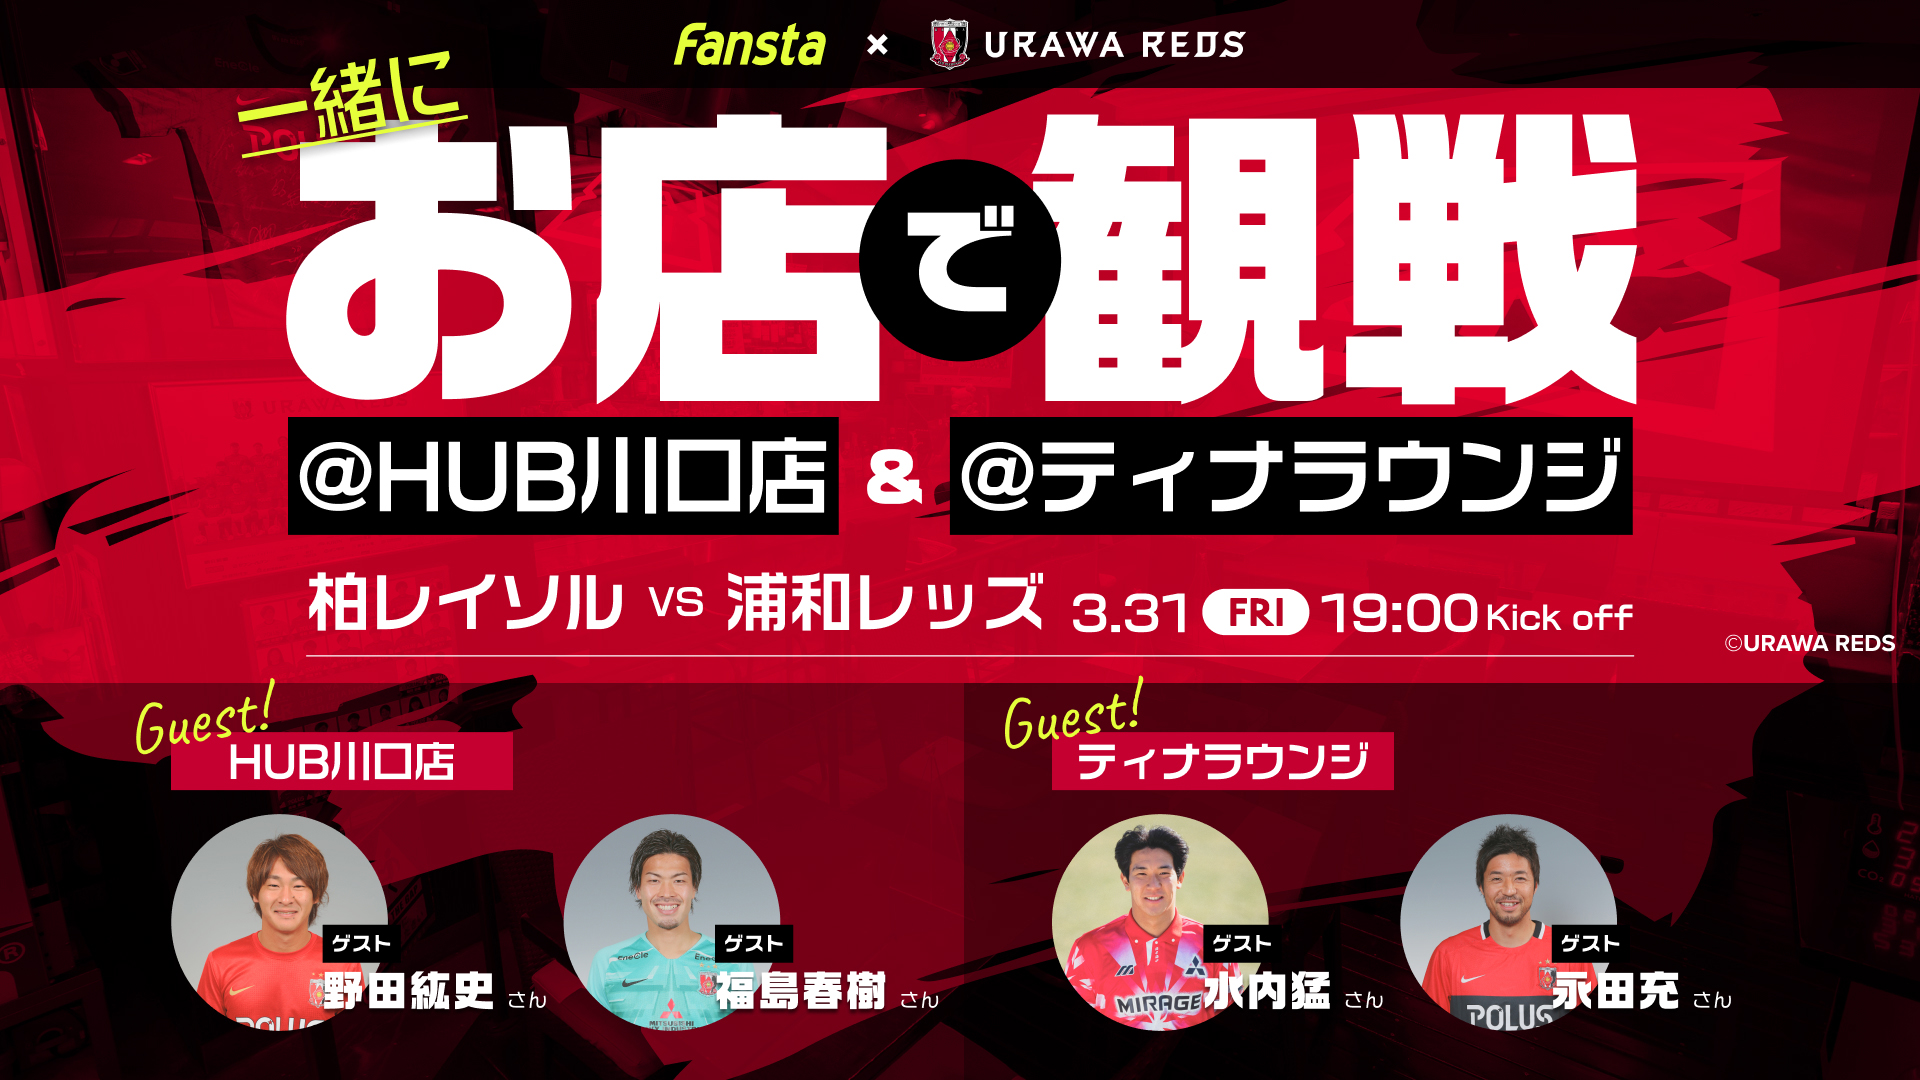 Support event held at the shop with Fansta&#39;s 3/31 away Kashiwa match Reds OB